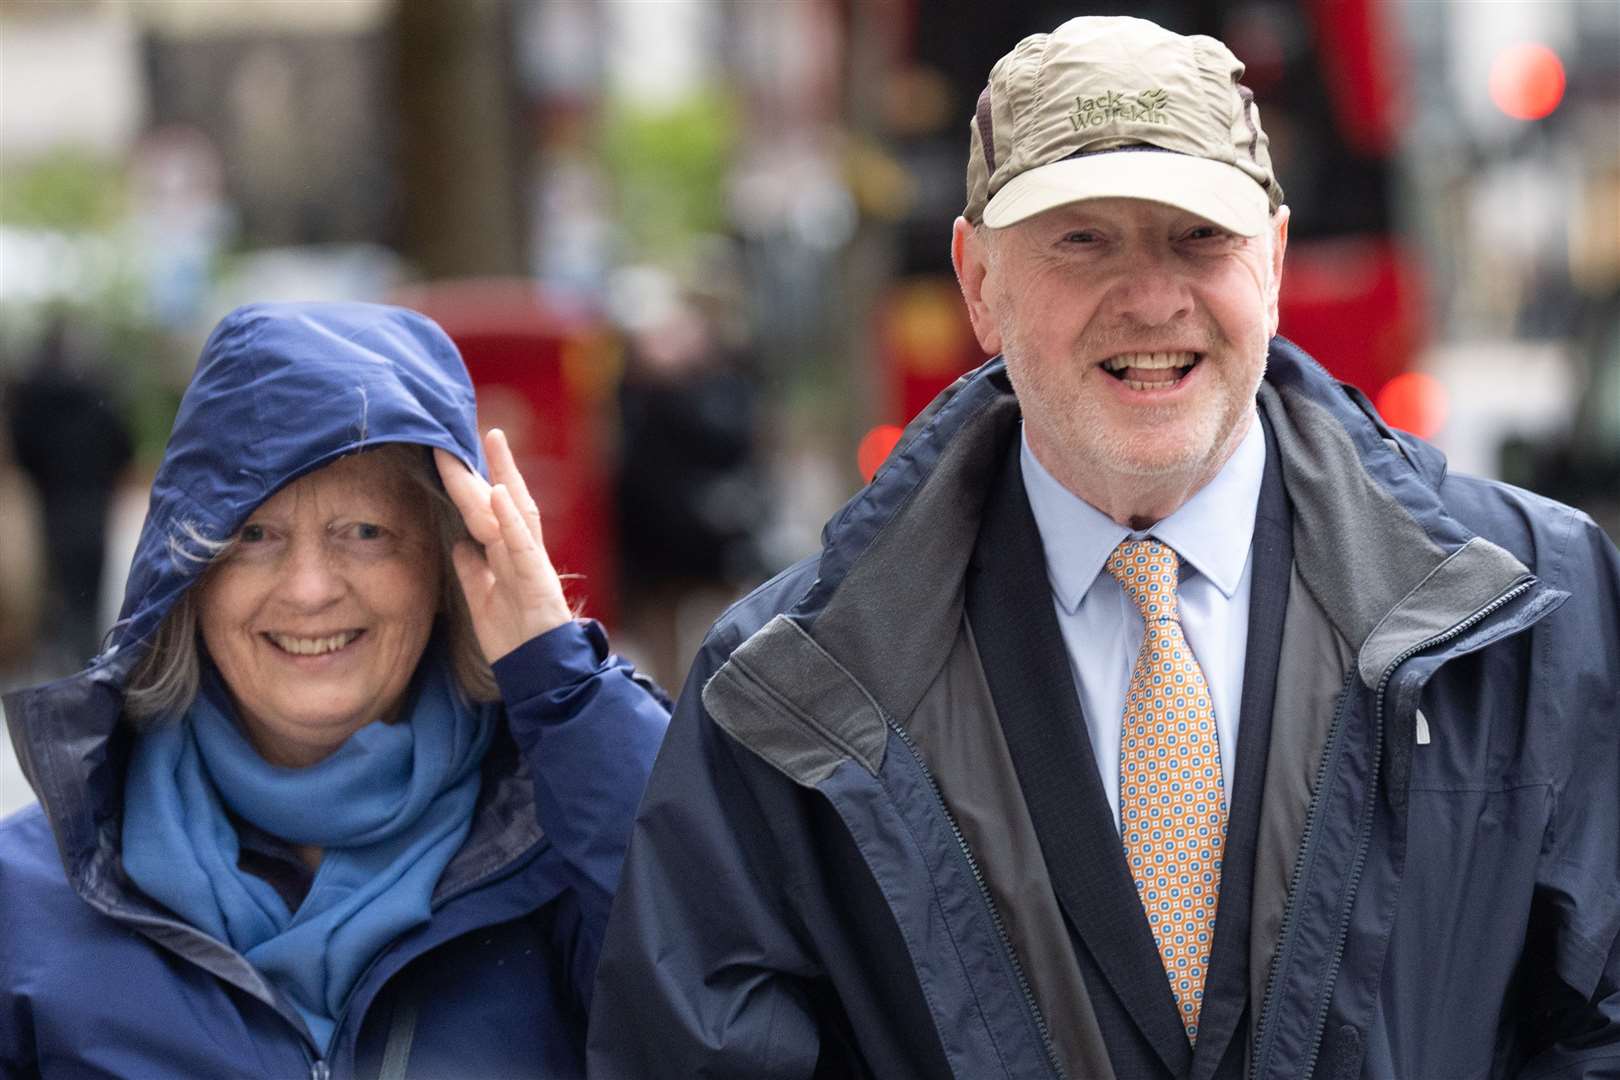 Former subpostmaster and lead campaigner Alan Bates, accompanied by his wife Suzanne Sercombe, arrives to give evidence (Stefan Rousseau/PA)